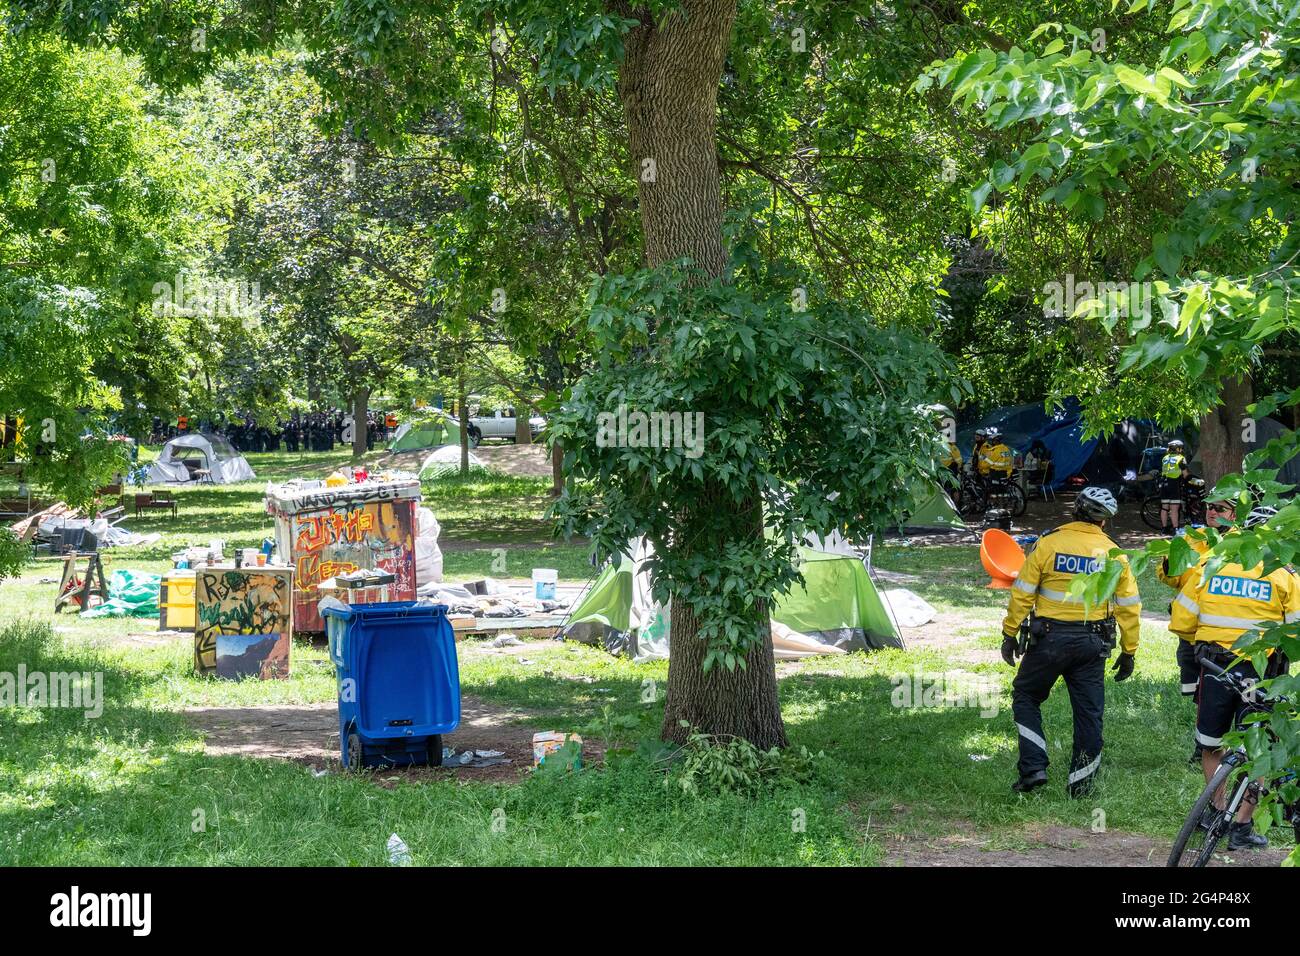 Toronto police and security forces clear out a homeless people encampment in Trinity Bellwoods Park, Canada. Stock Photo